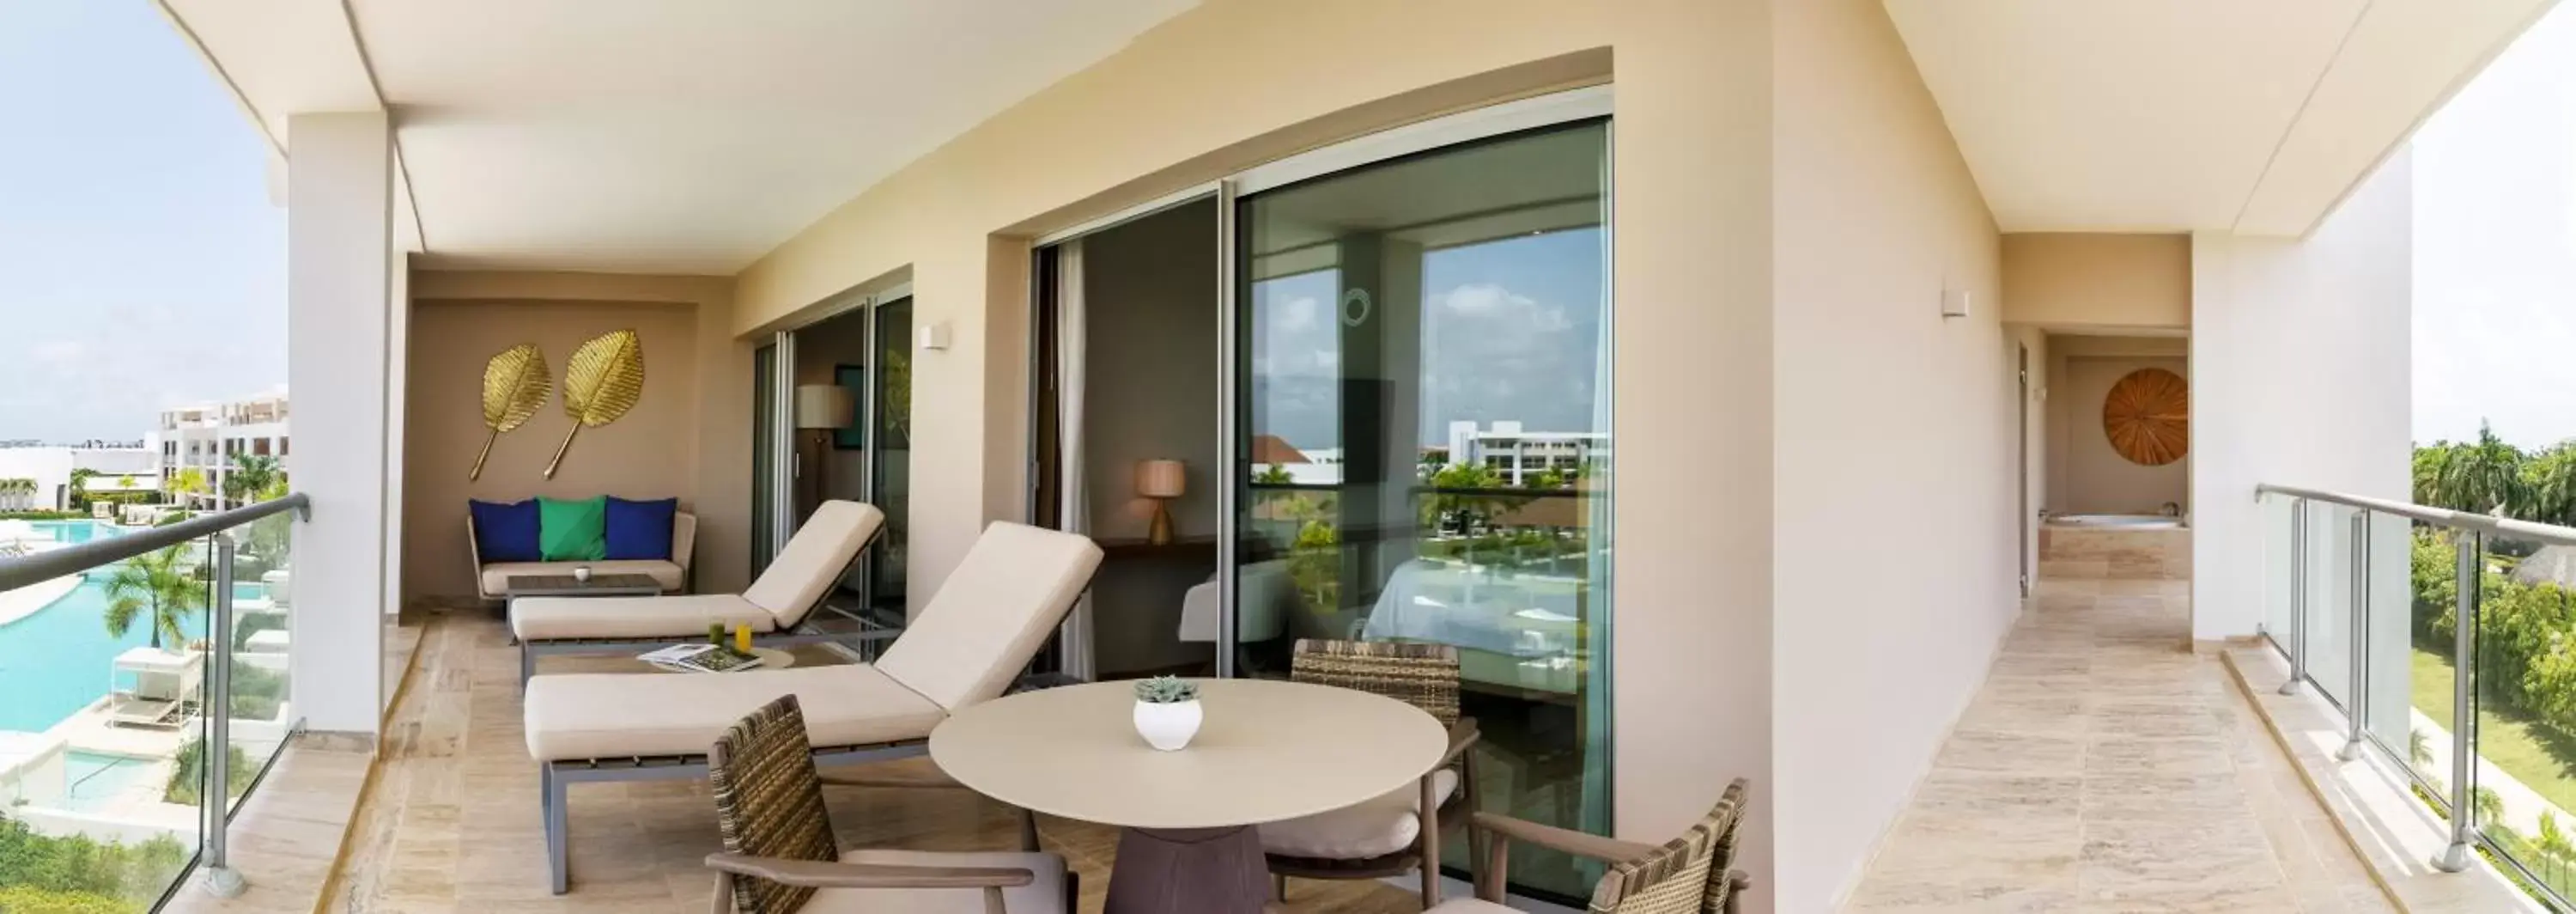 Master Corner Suite in Falcon's Resort by Melia, All Suites - Punta Cana - Katmandu Park Included